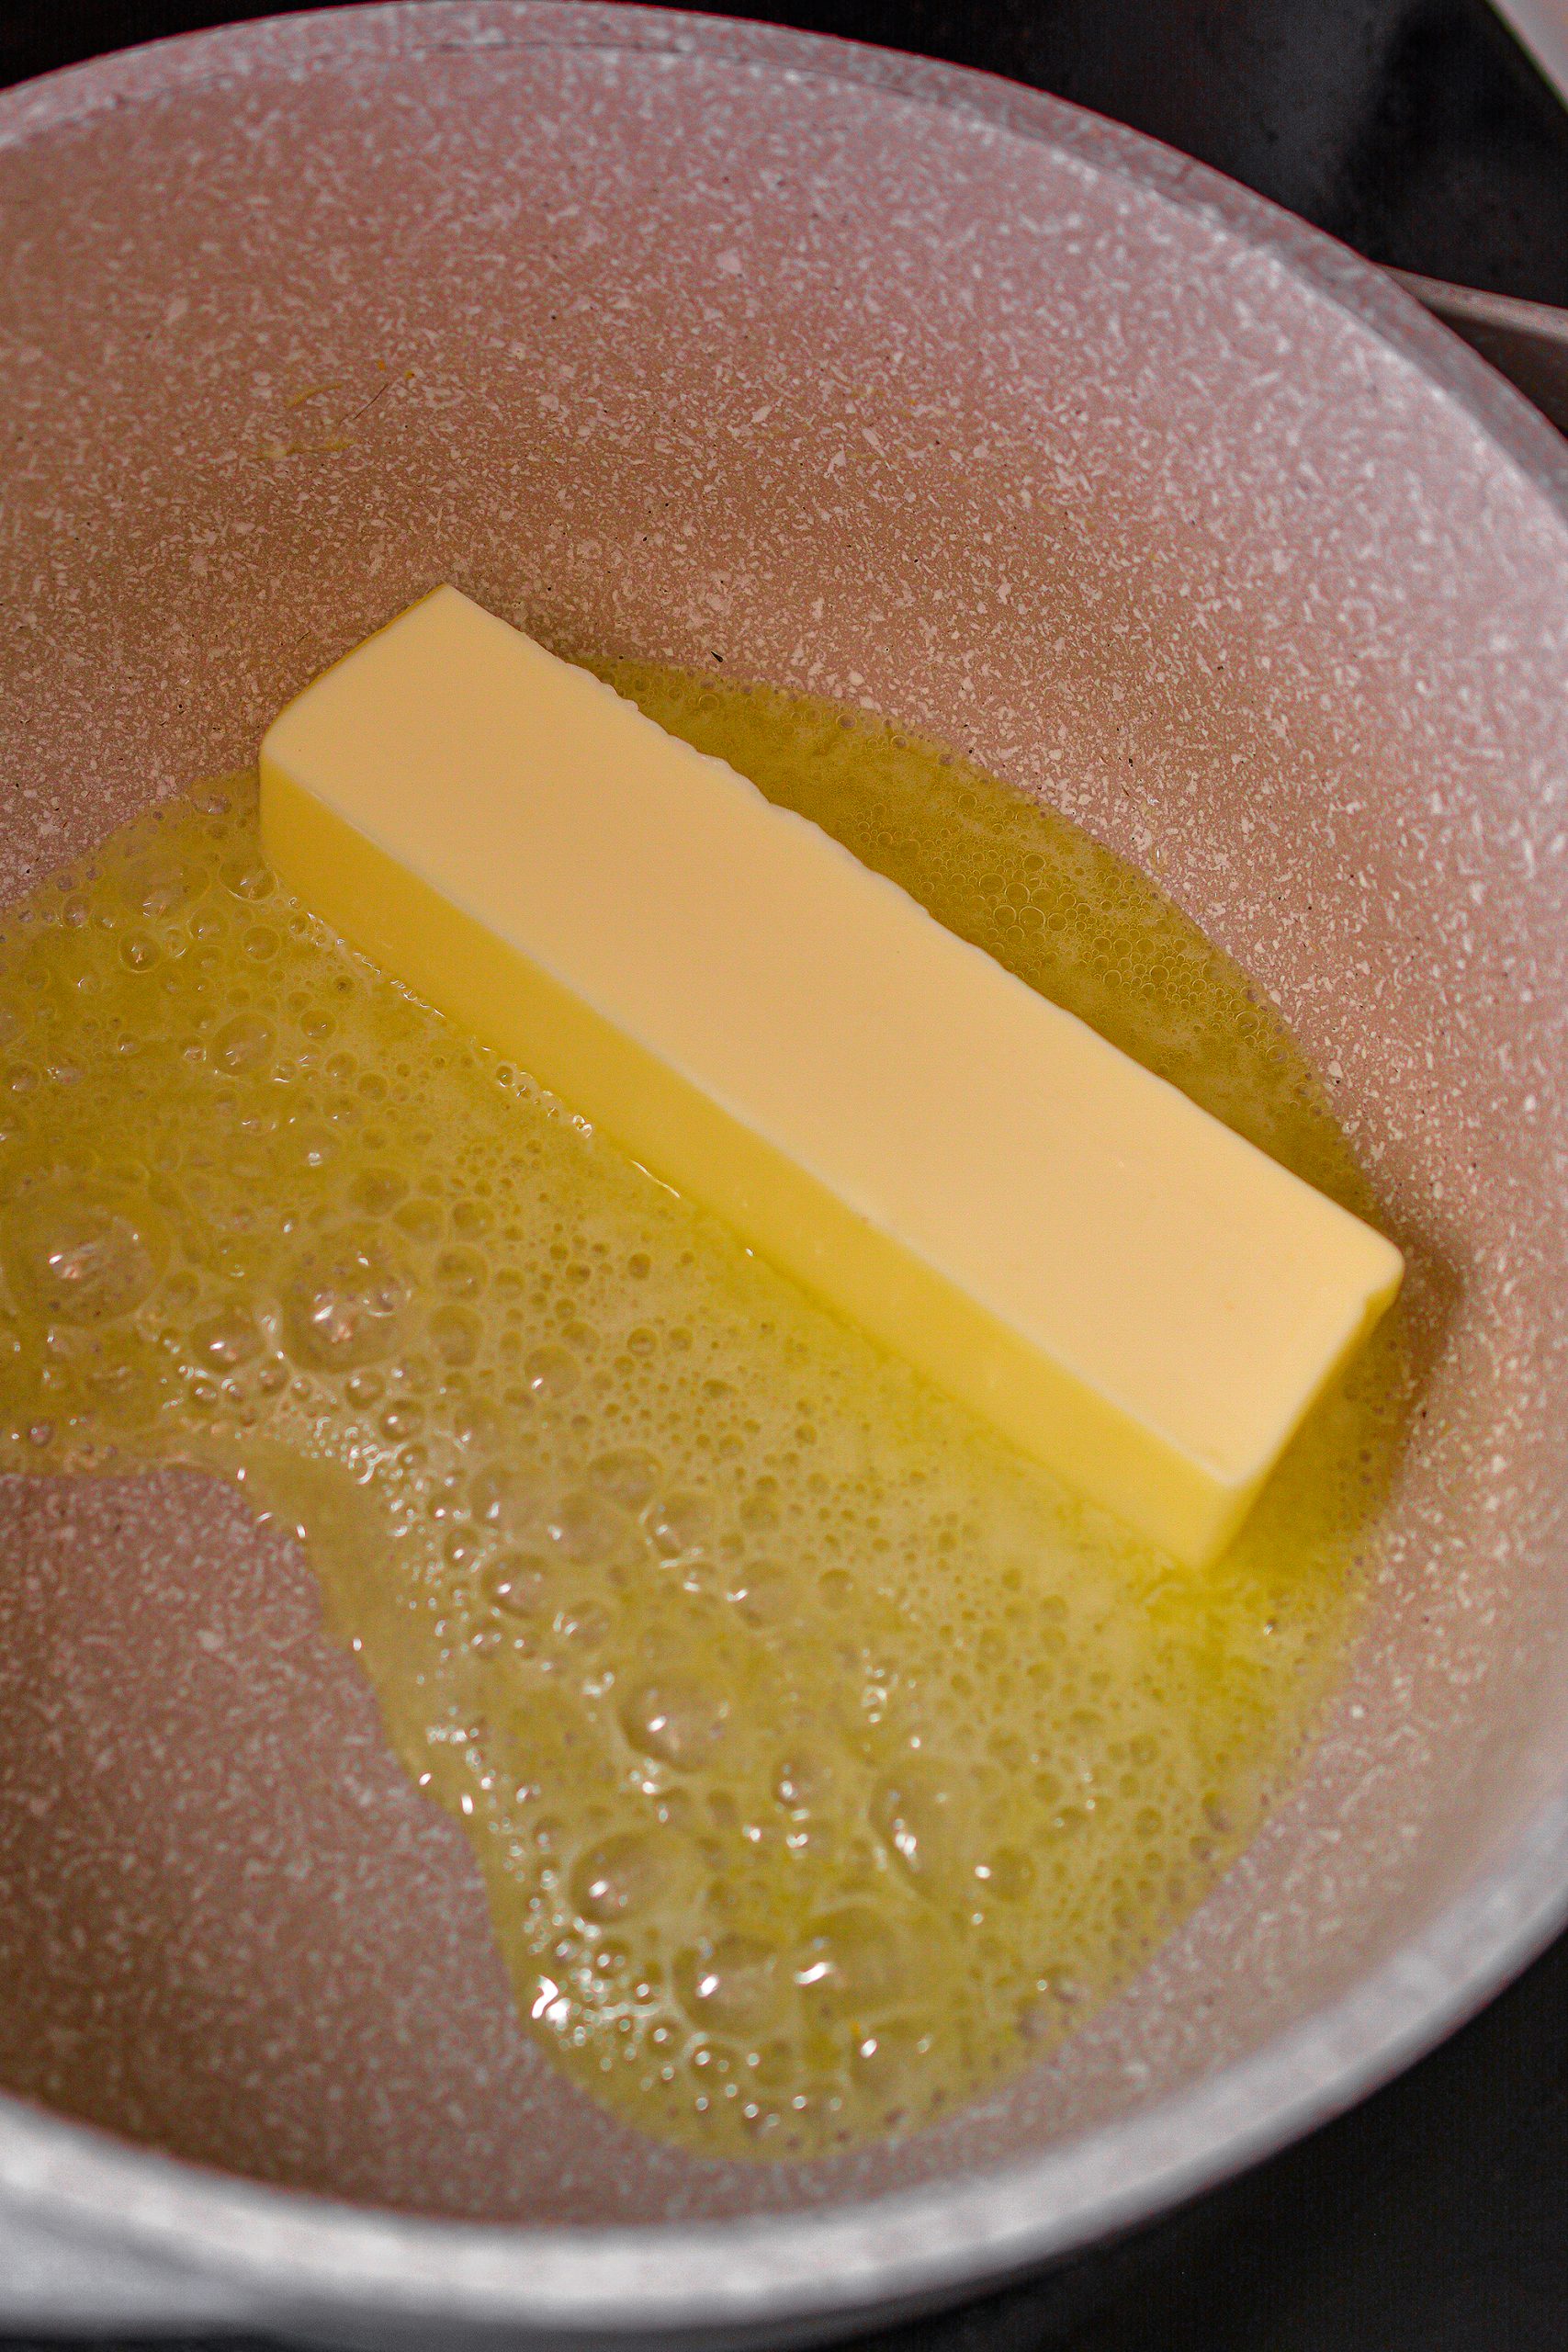 In the saucepan, add the ½ cup of butter and flour. Stir until smooth and the butter is melted.